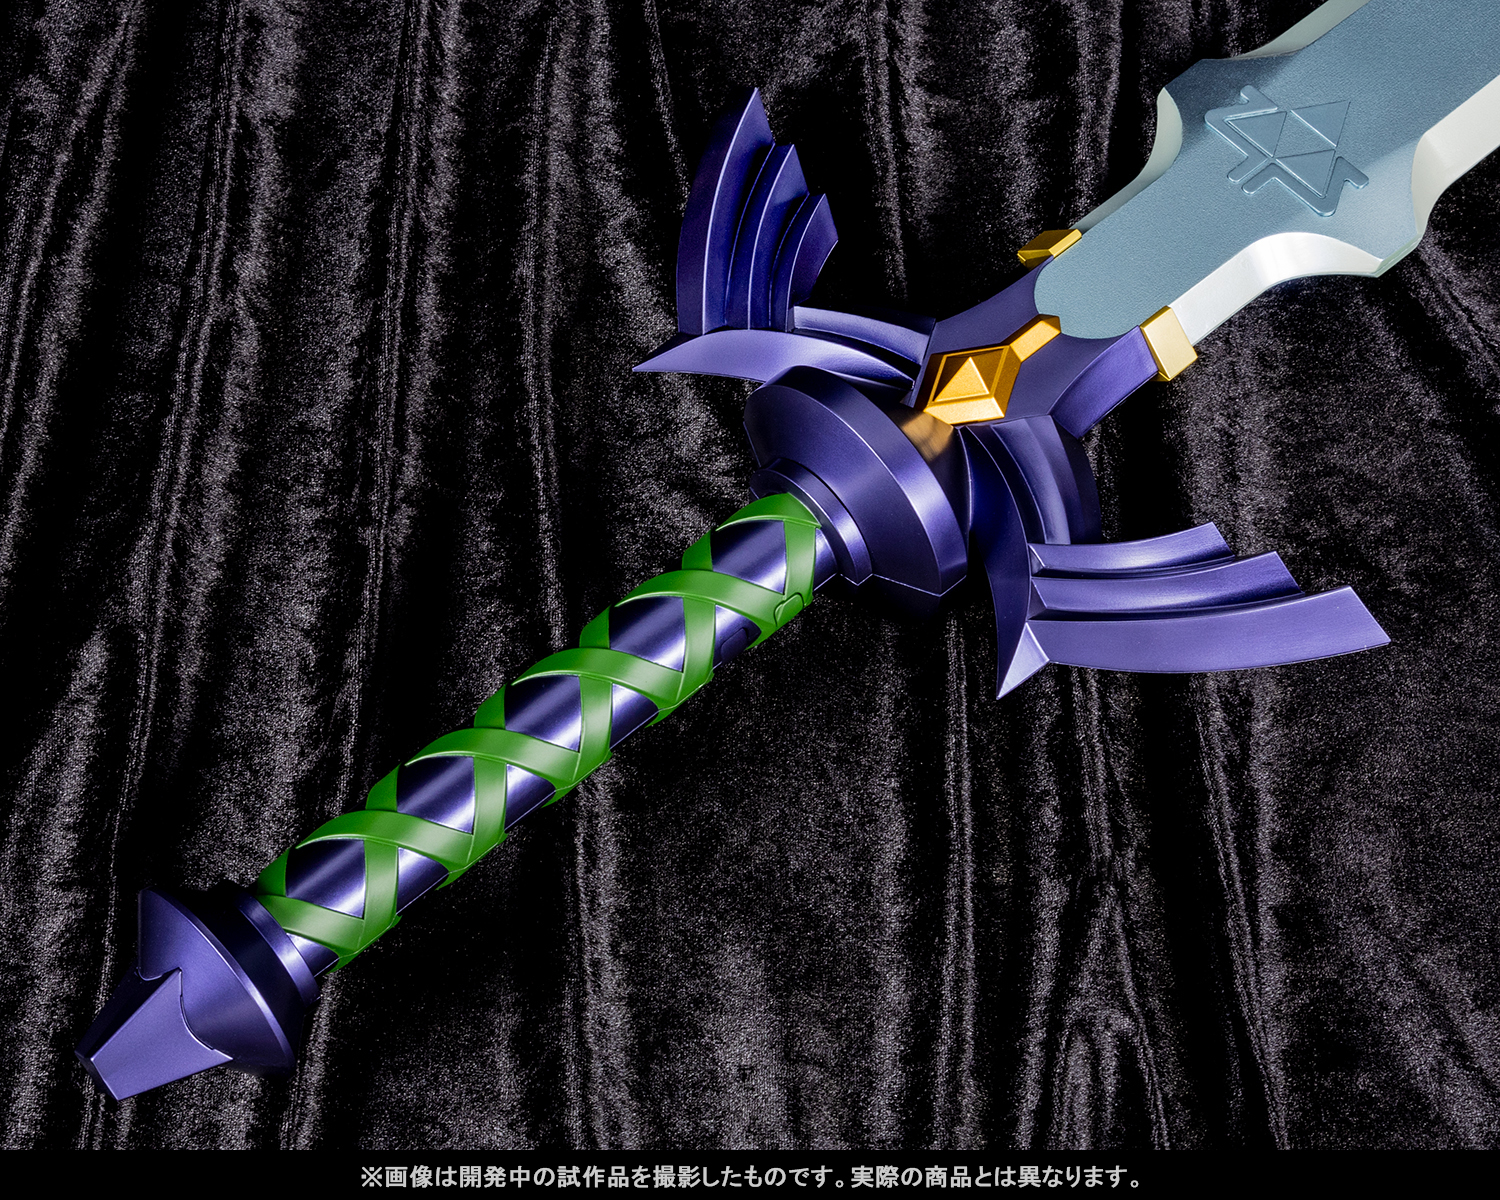 Pre-orders begin on May 10th for the &quot;PROPLICA THE LEGEND OF ZELDA MASTER SWORD&quot; prototype